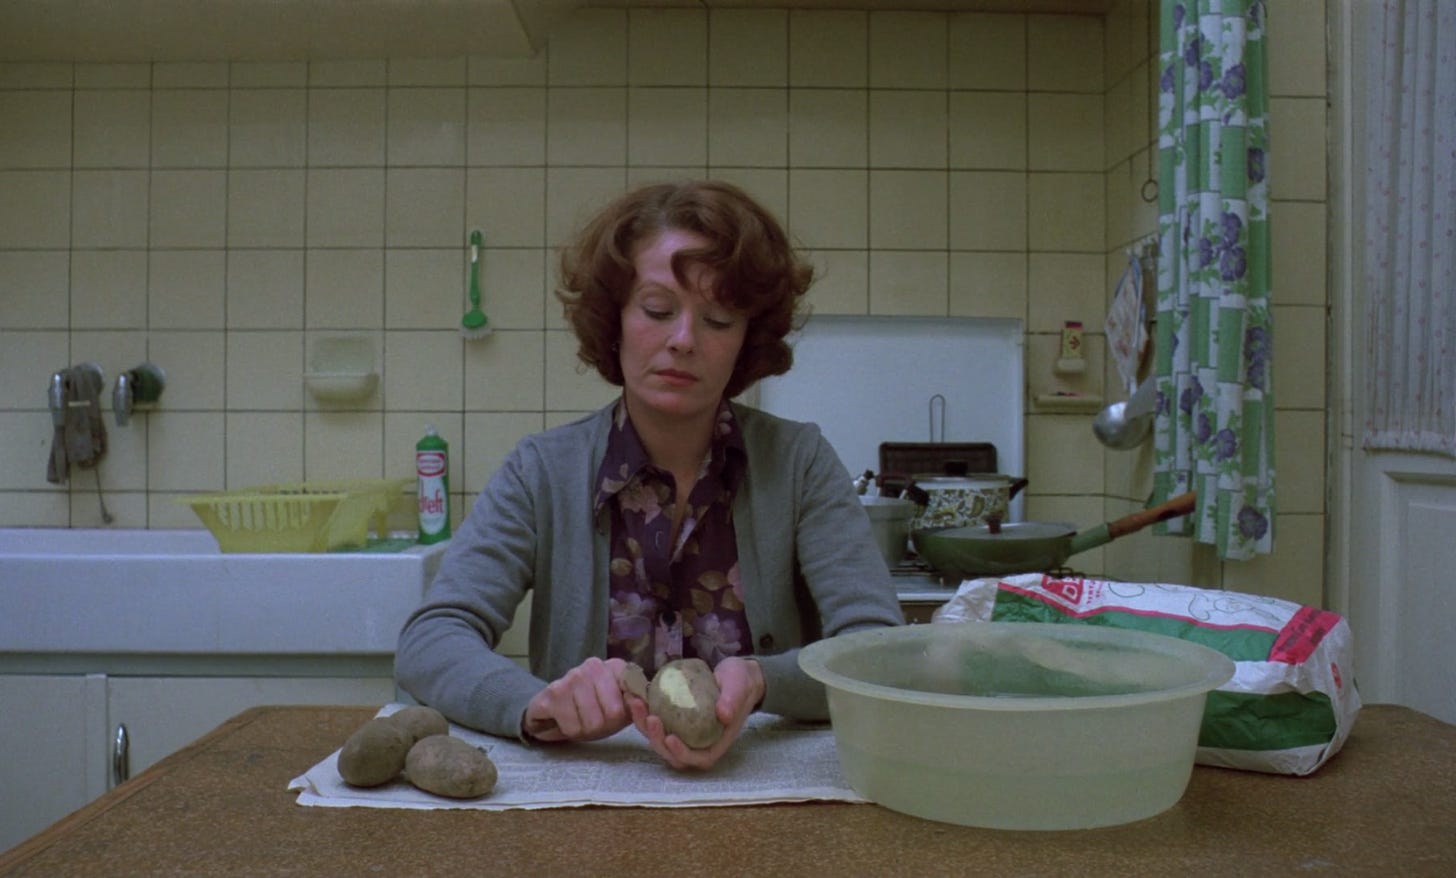 Jeanne Dielman sits centre-frame, sat at her kitchen table, peeling potatoes. Her slightly messed hair betrays her frazzled state at this, the halfway point of the film.